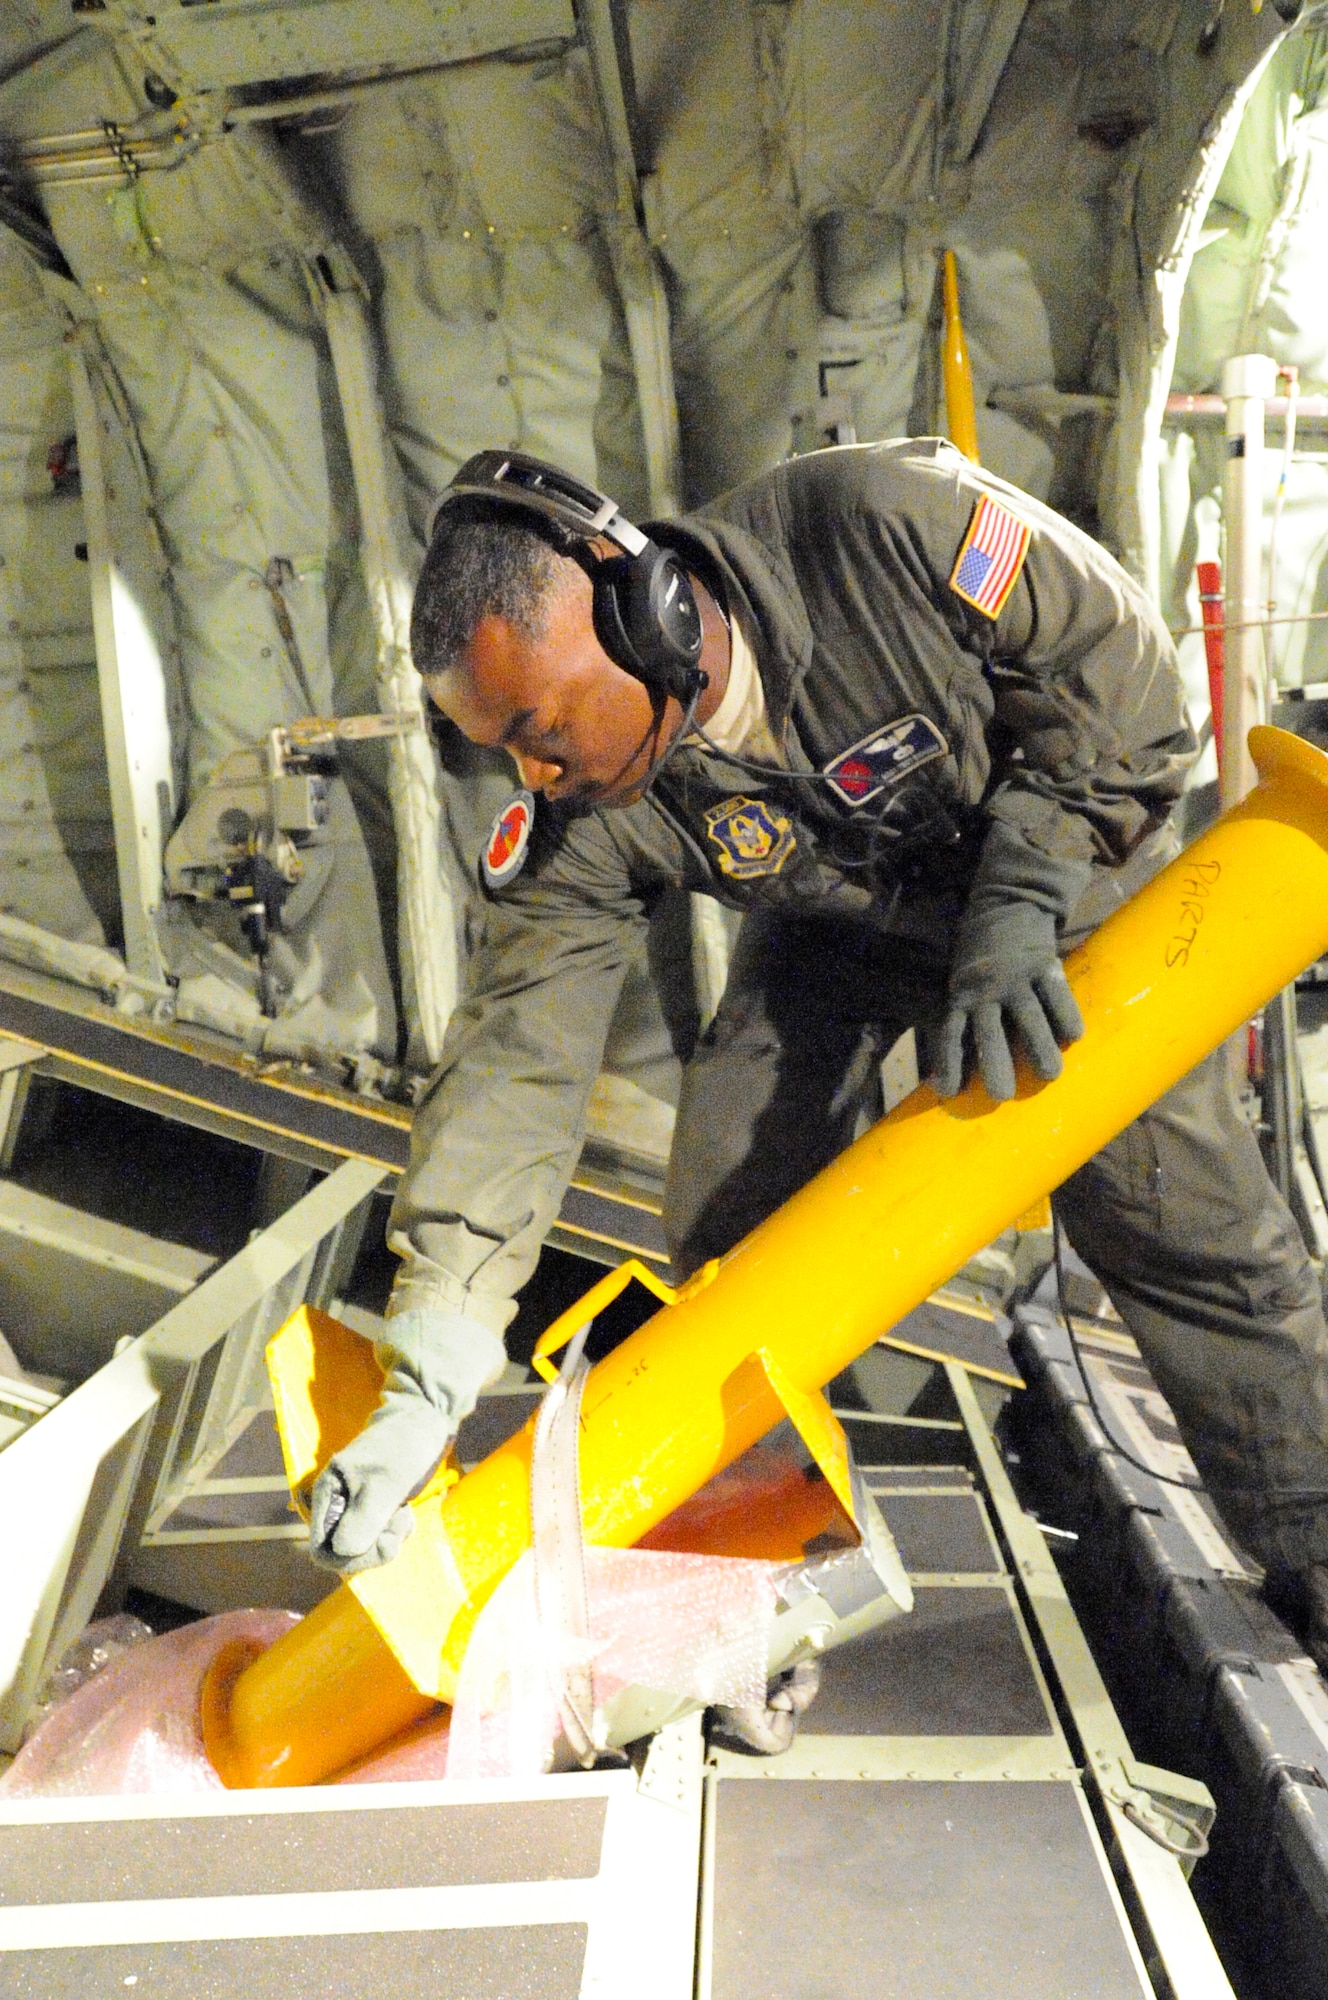 Master Sgt. Troy Bickham. 53rd Weather Reconnaissance Squadron loadmaster and dropsonde operator, pulls the handle on the launch adapter to release an ABXT buoy used by the U.S. Navy to collect salinity and water temperature during a flight through Hurricane Iselle off the coast of Hawaii Aug 7.   The 53rd WRS "Hurricane Hunters" aircrew and 403rd Wing maintenance personnel deployed to Hickham Air Force Base, Hawaii to fly storm missions into Hurricanes Iselle and Julio.  The "Hurricane Hunters" fly storm missions in both the Atlantic and Pacific Oceans during the hurricane season which offically starts June 1 and ends Nov. 30 yearly. (U.S. Air Force photo by Master Sgt. Jessica Kendziorek)  